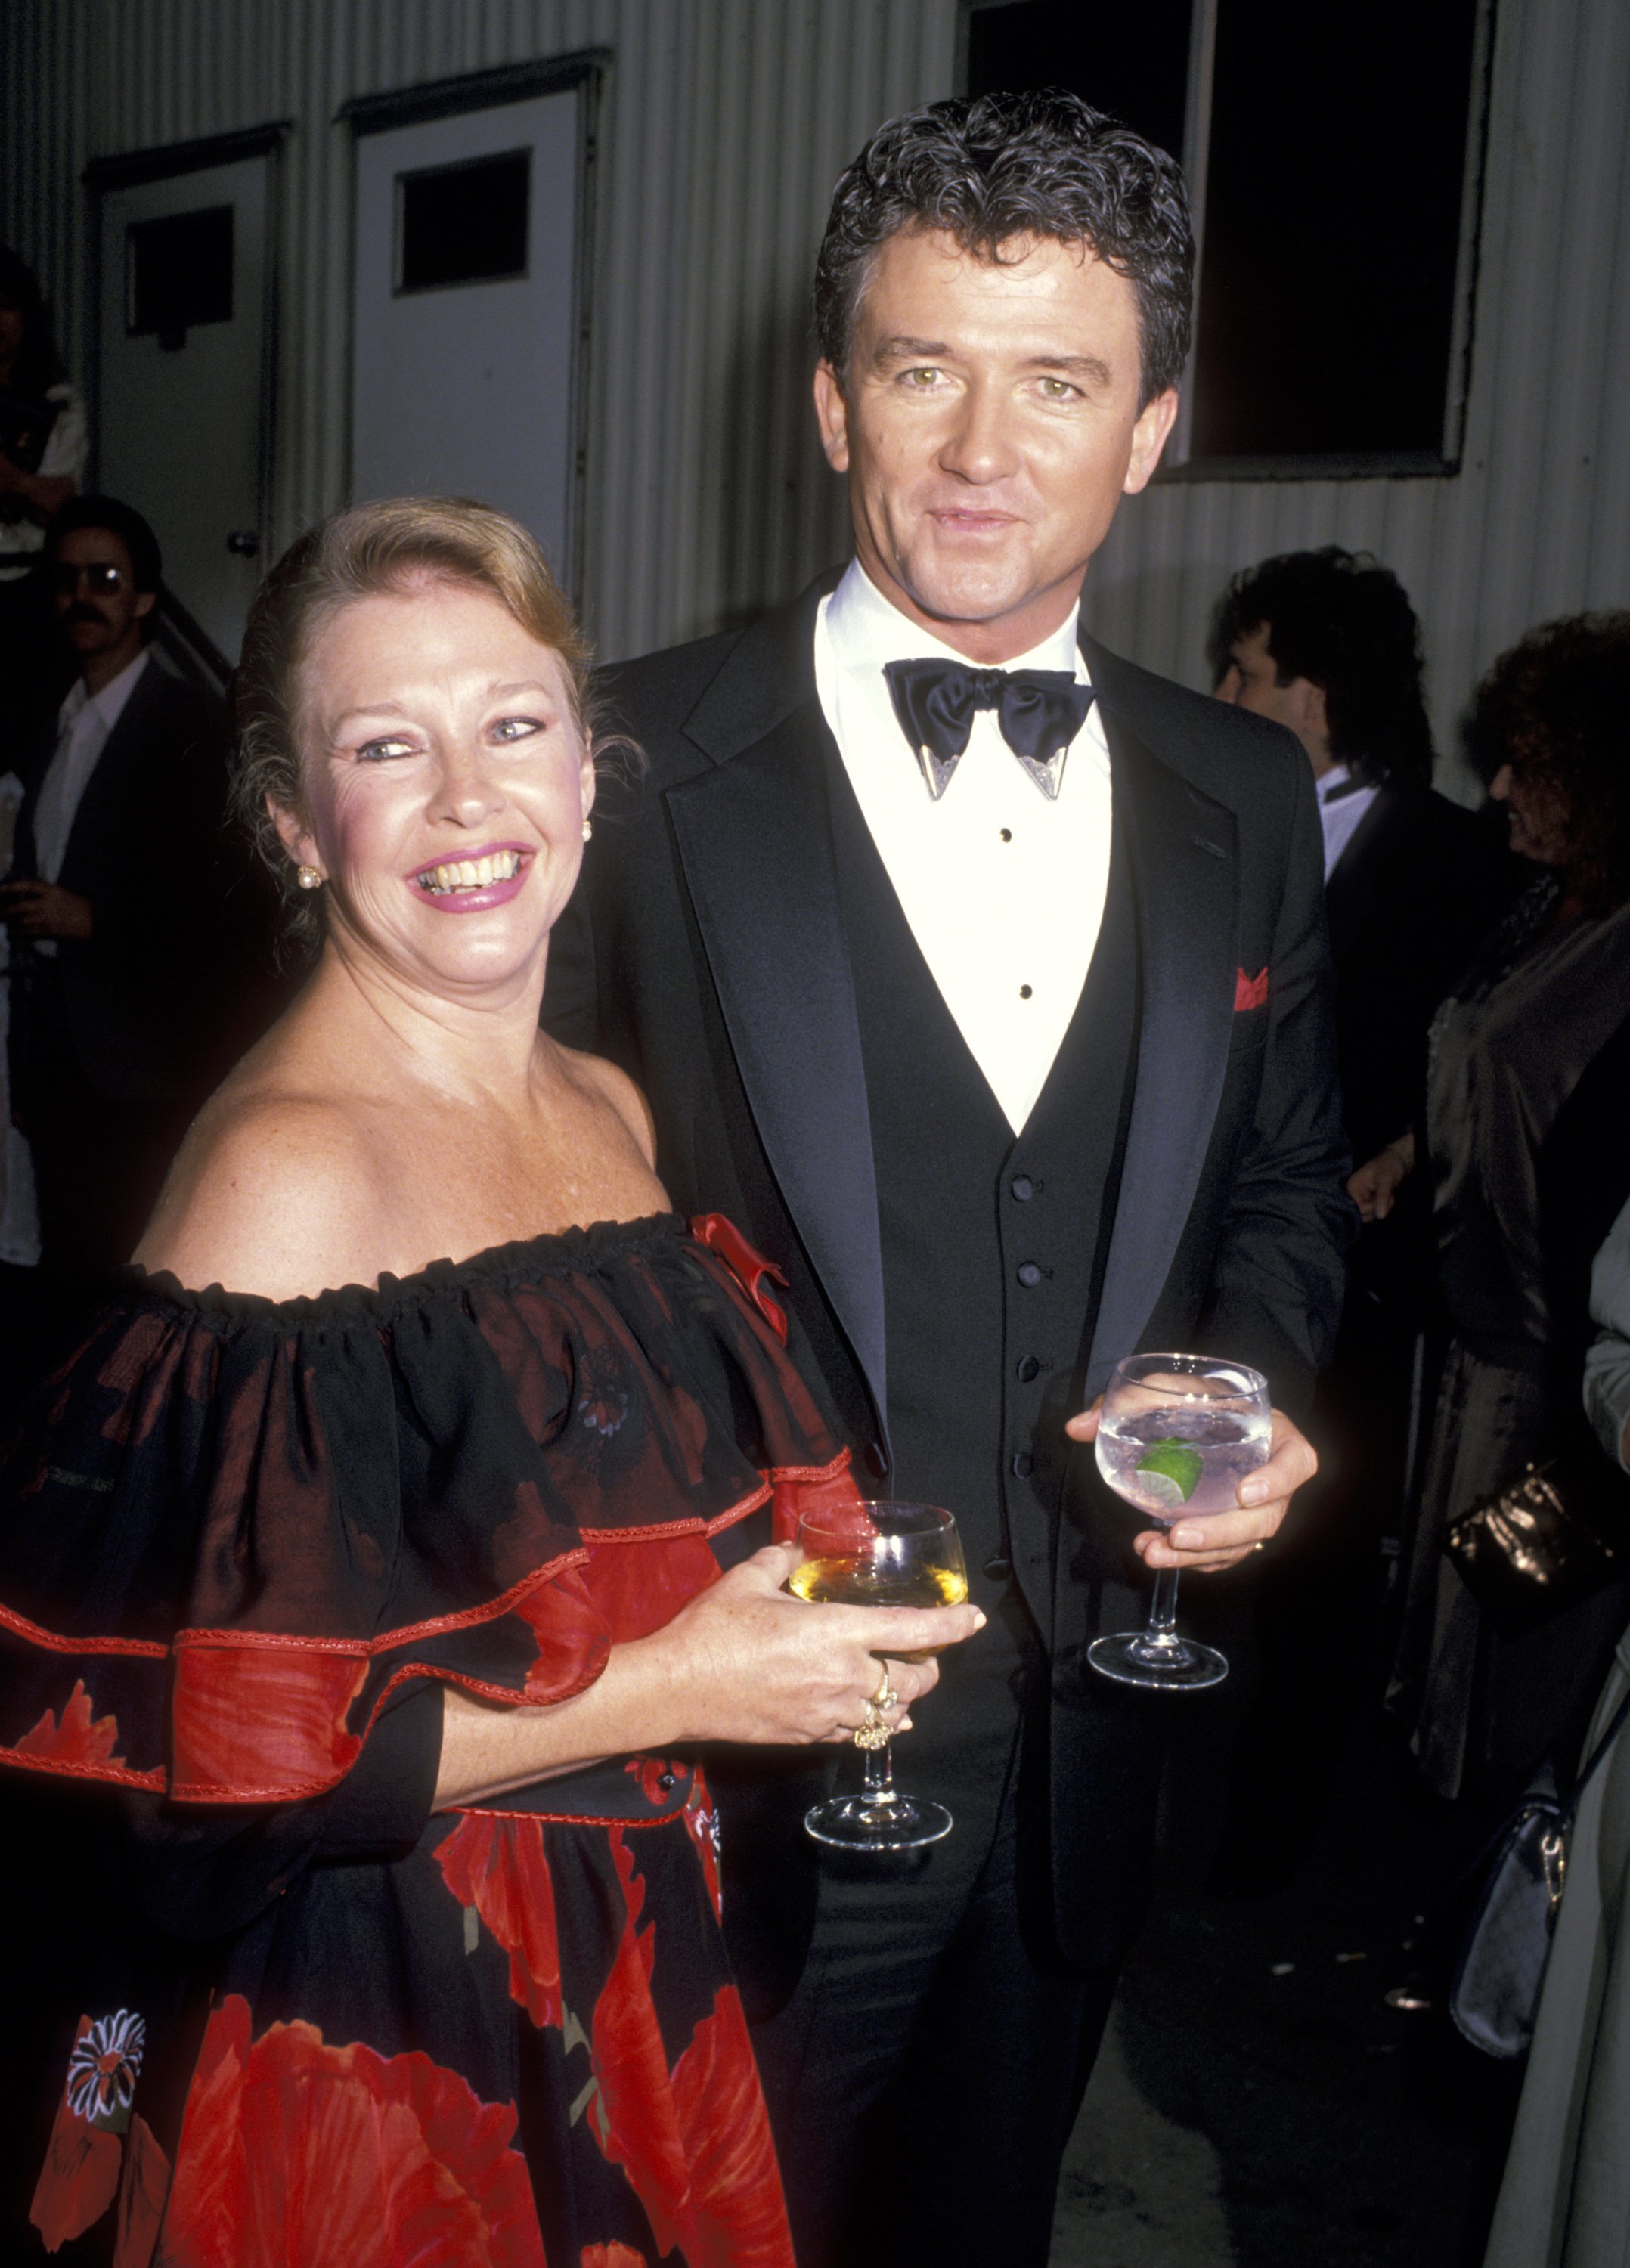 Actor Patrick Duffy and his wife dancer Carlyn Rosser attend the 24th Annual Academy of Country Music Awards at Walt Disney Studios on January 1, 1999 in Burbank, California | Source: Getty Images